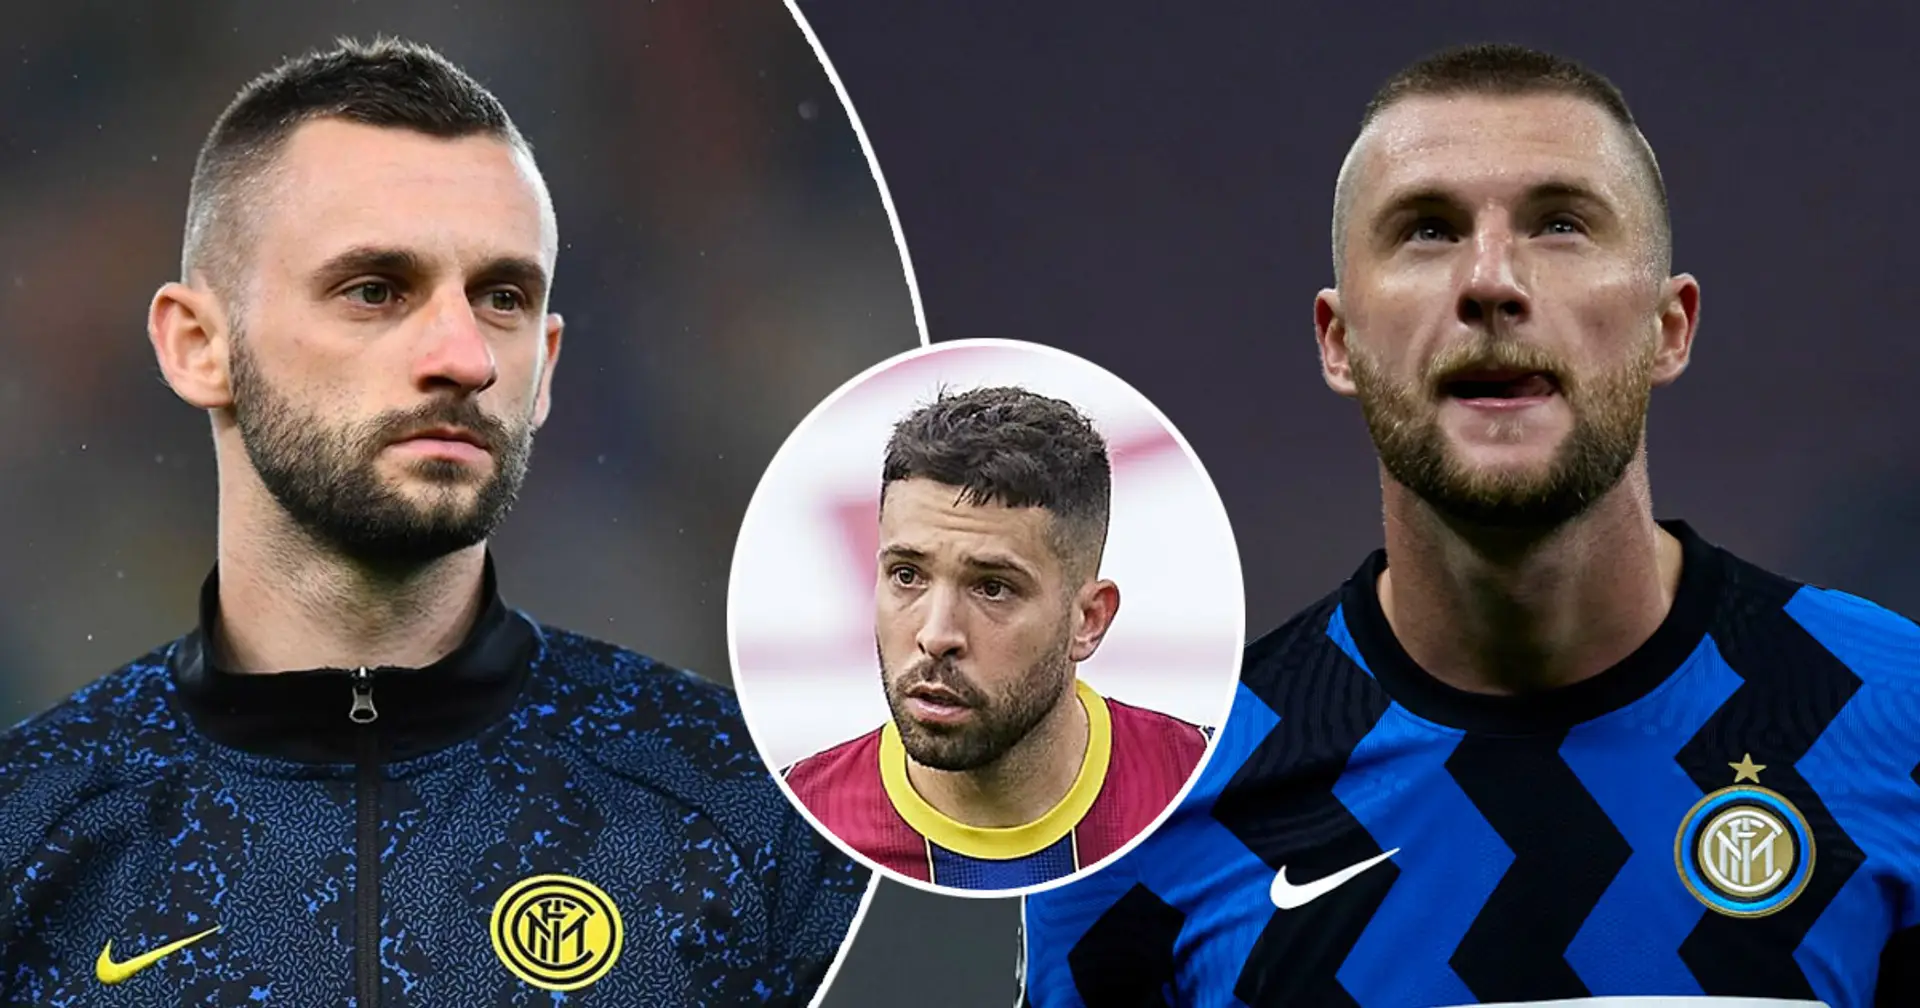 'If they can give us Brozovic or Skriniar, it’s good': Barca fans react as Inter reportedly eyeing swap deal for Jordi Alba